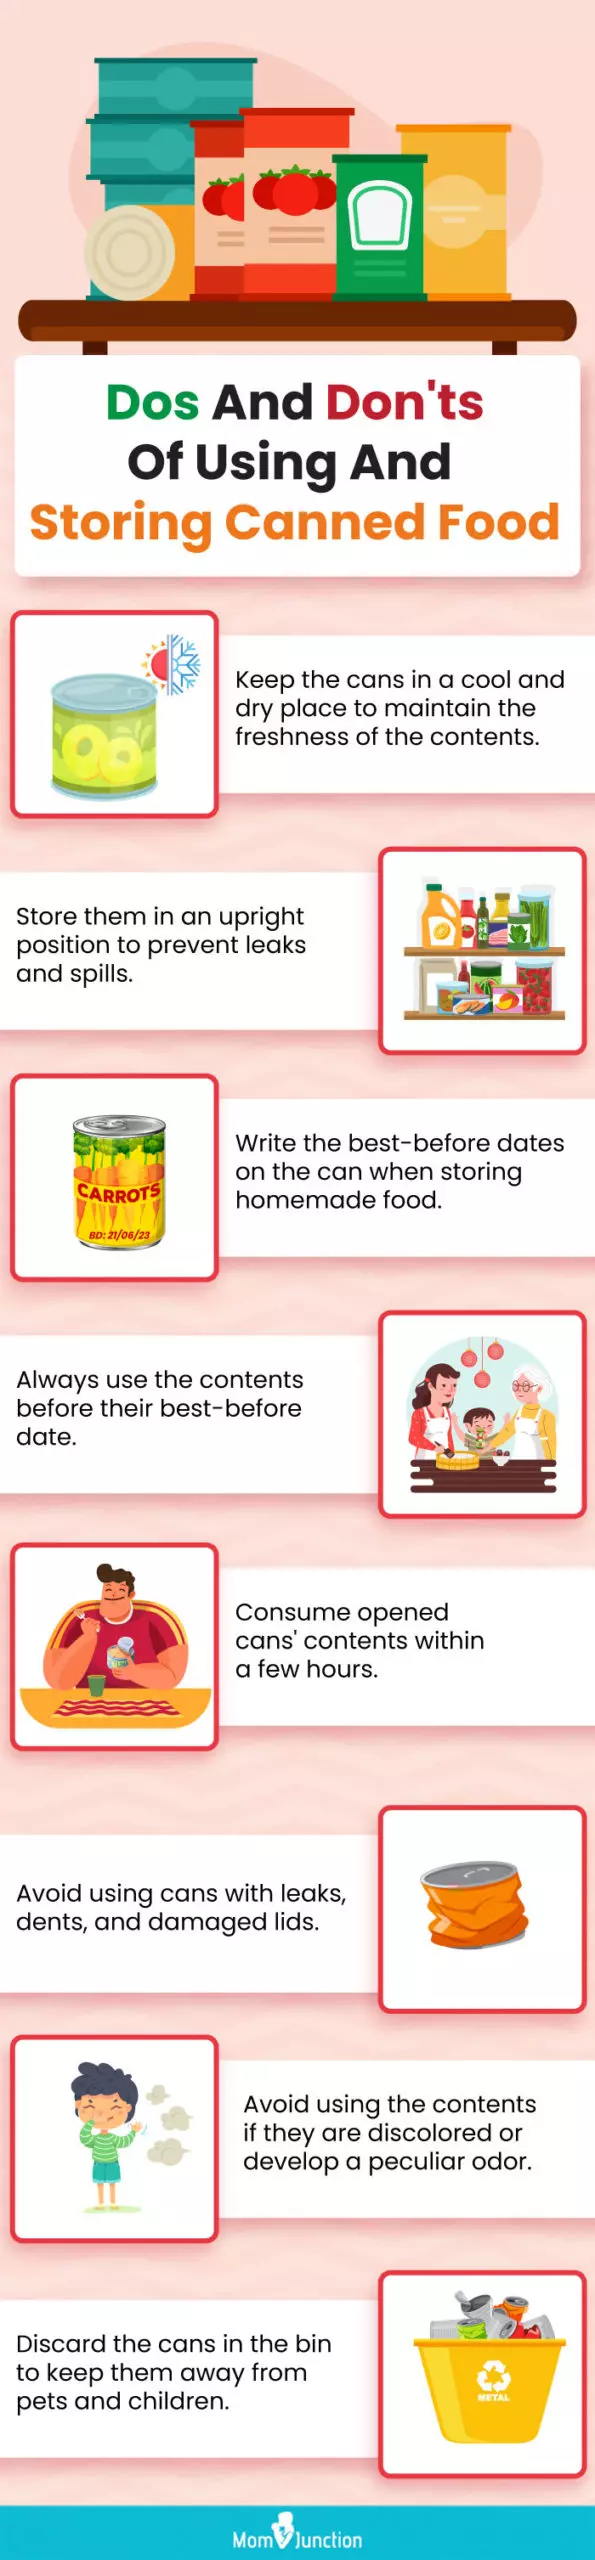 Dos-And-Don'ts Of Using And Storing Canned Food (infographic)